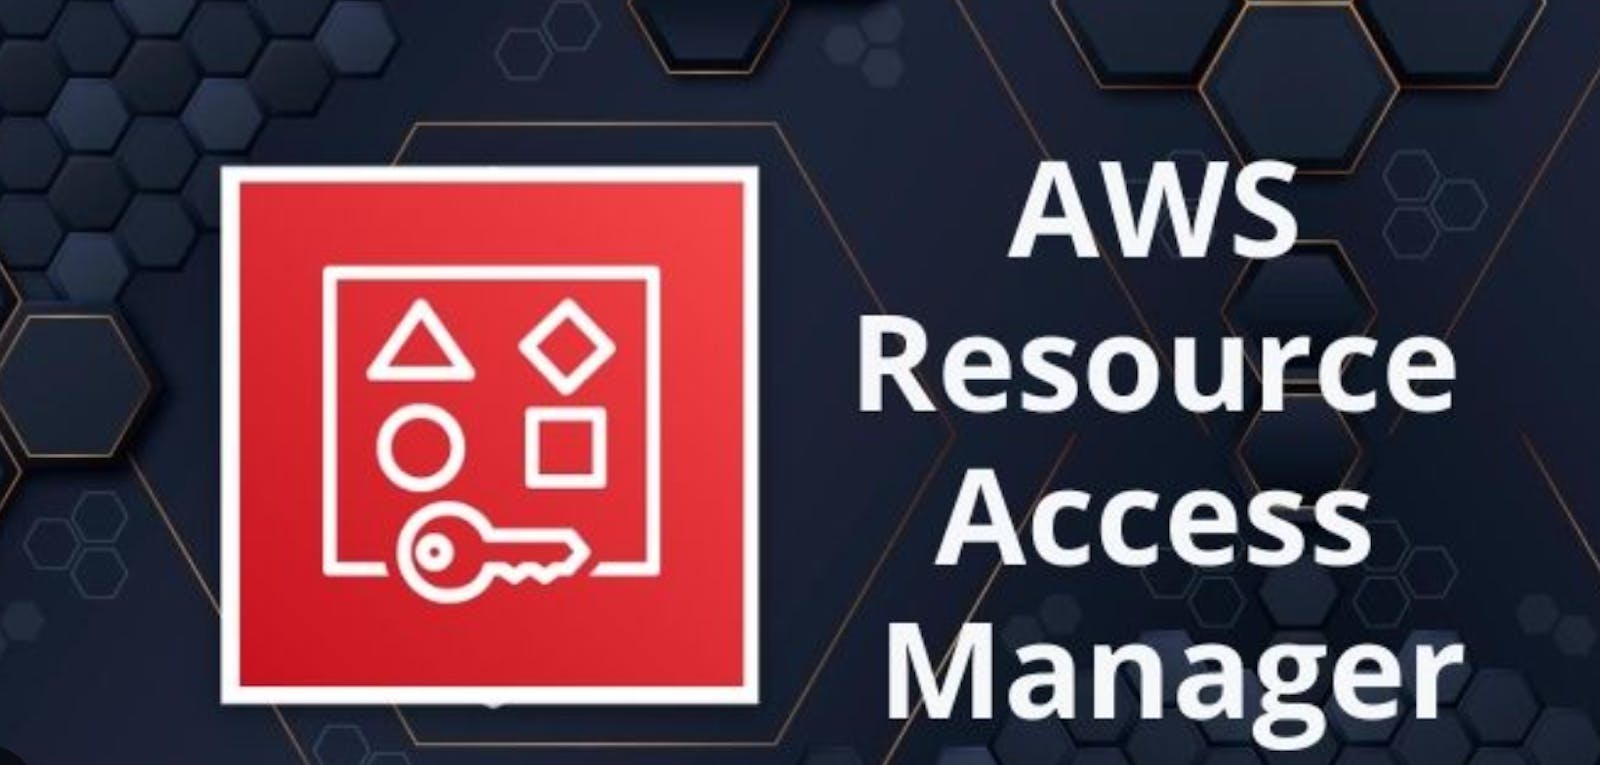 A Beginner's Guide to Implementing Amazon Resource Access Manager (RAM) on AWS